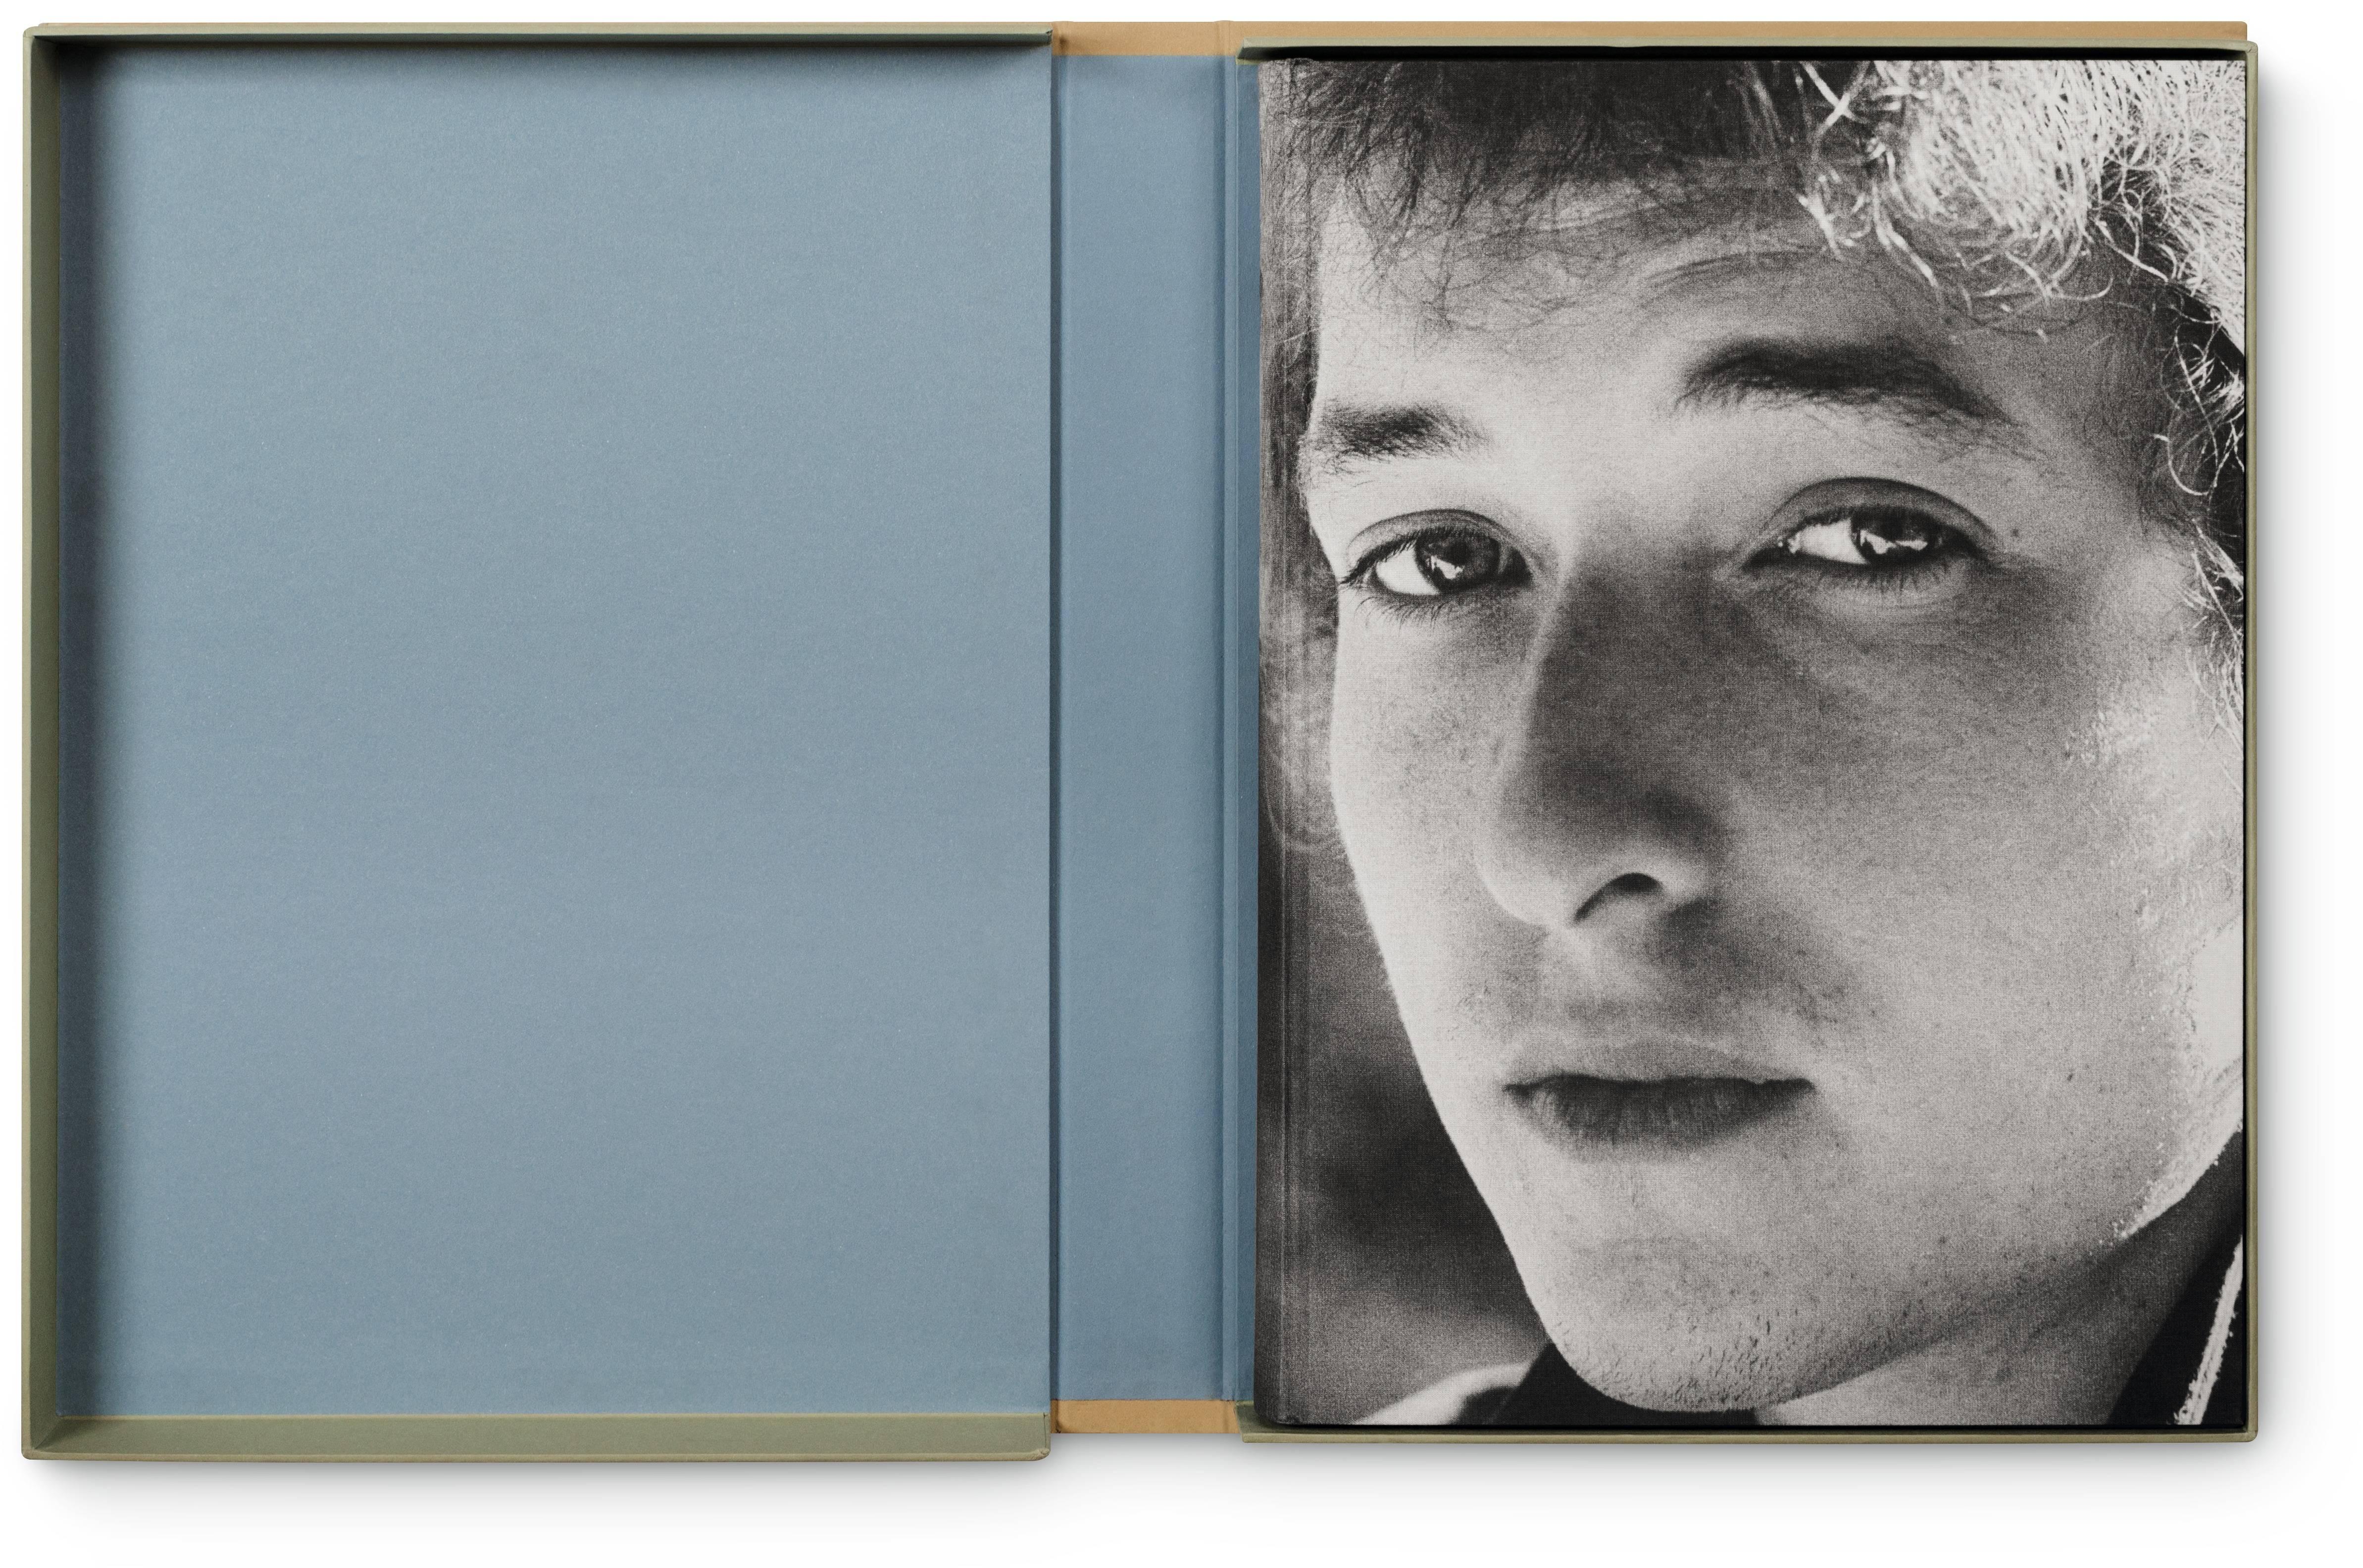 Hardcover in a clamshell box, letterpress-printed chapter openers with tipped-in photographs, two different paper stocks, and three foldouts, measures: 31.2 x 44 cm (12.3 x 17.3 in.), 288 pages.

When photographer Daniel Kramer first met Bob